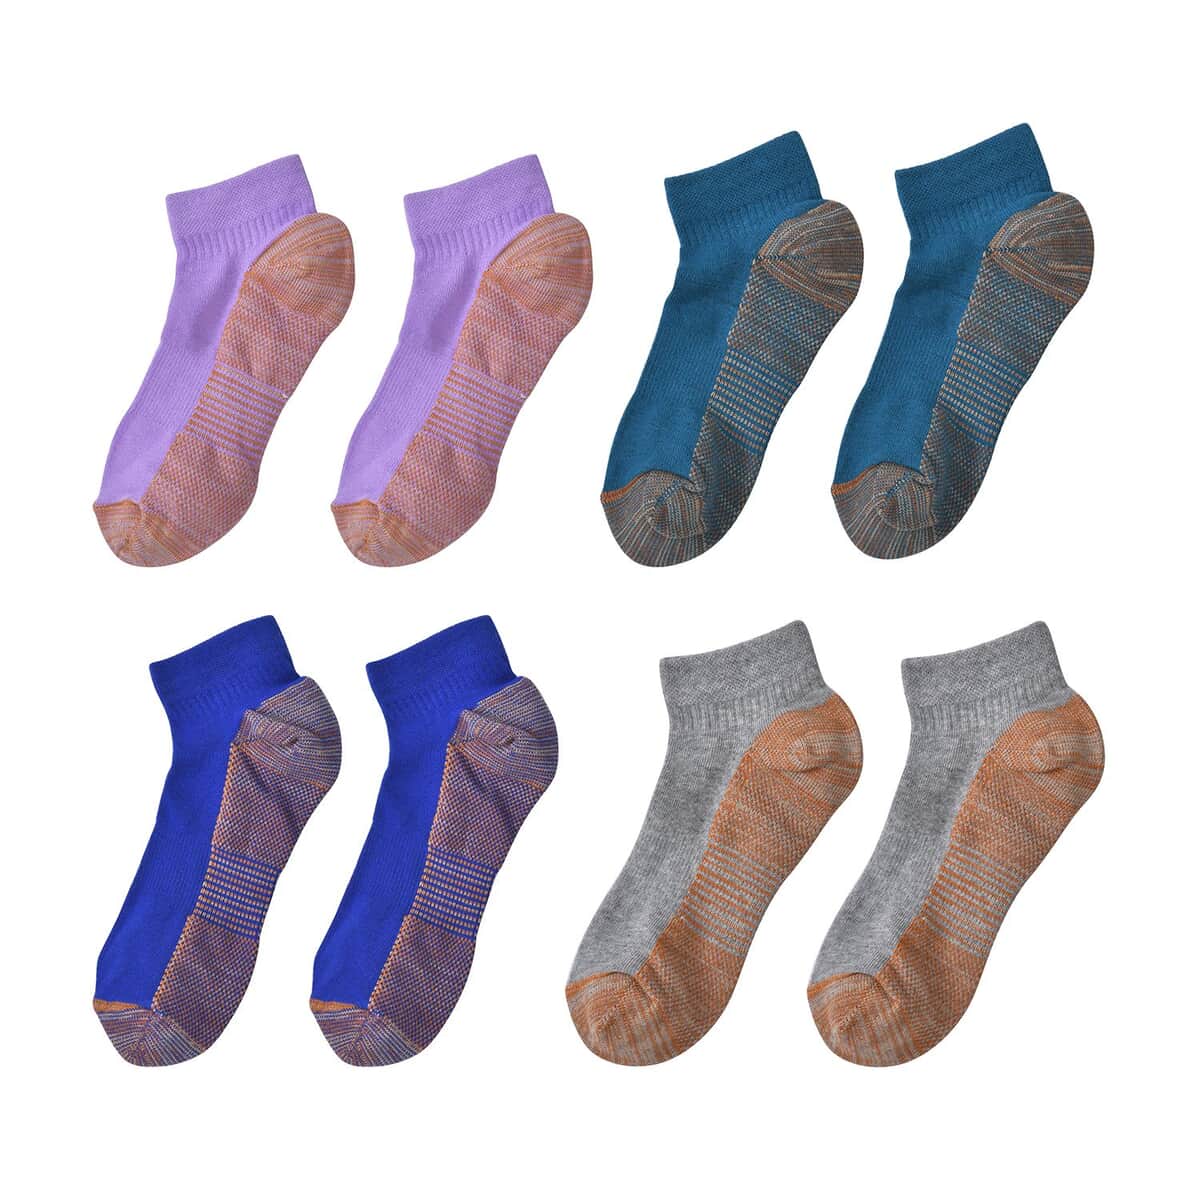 Set of 4 Pairs of Ankle Length Odor Free Copper Compression Socks For Men And Women, Premium Material Moisture Wicking Unisex Copper Infused Socks - Purple, Green, Navy & Gray (S/M) image number 0